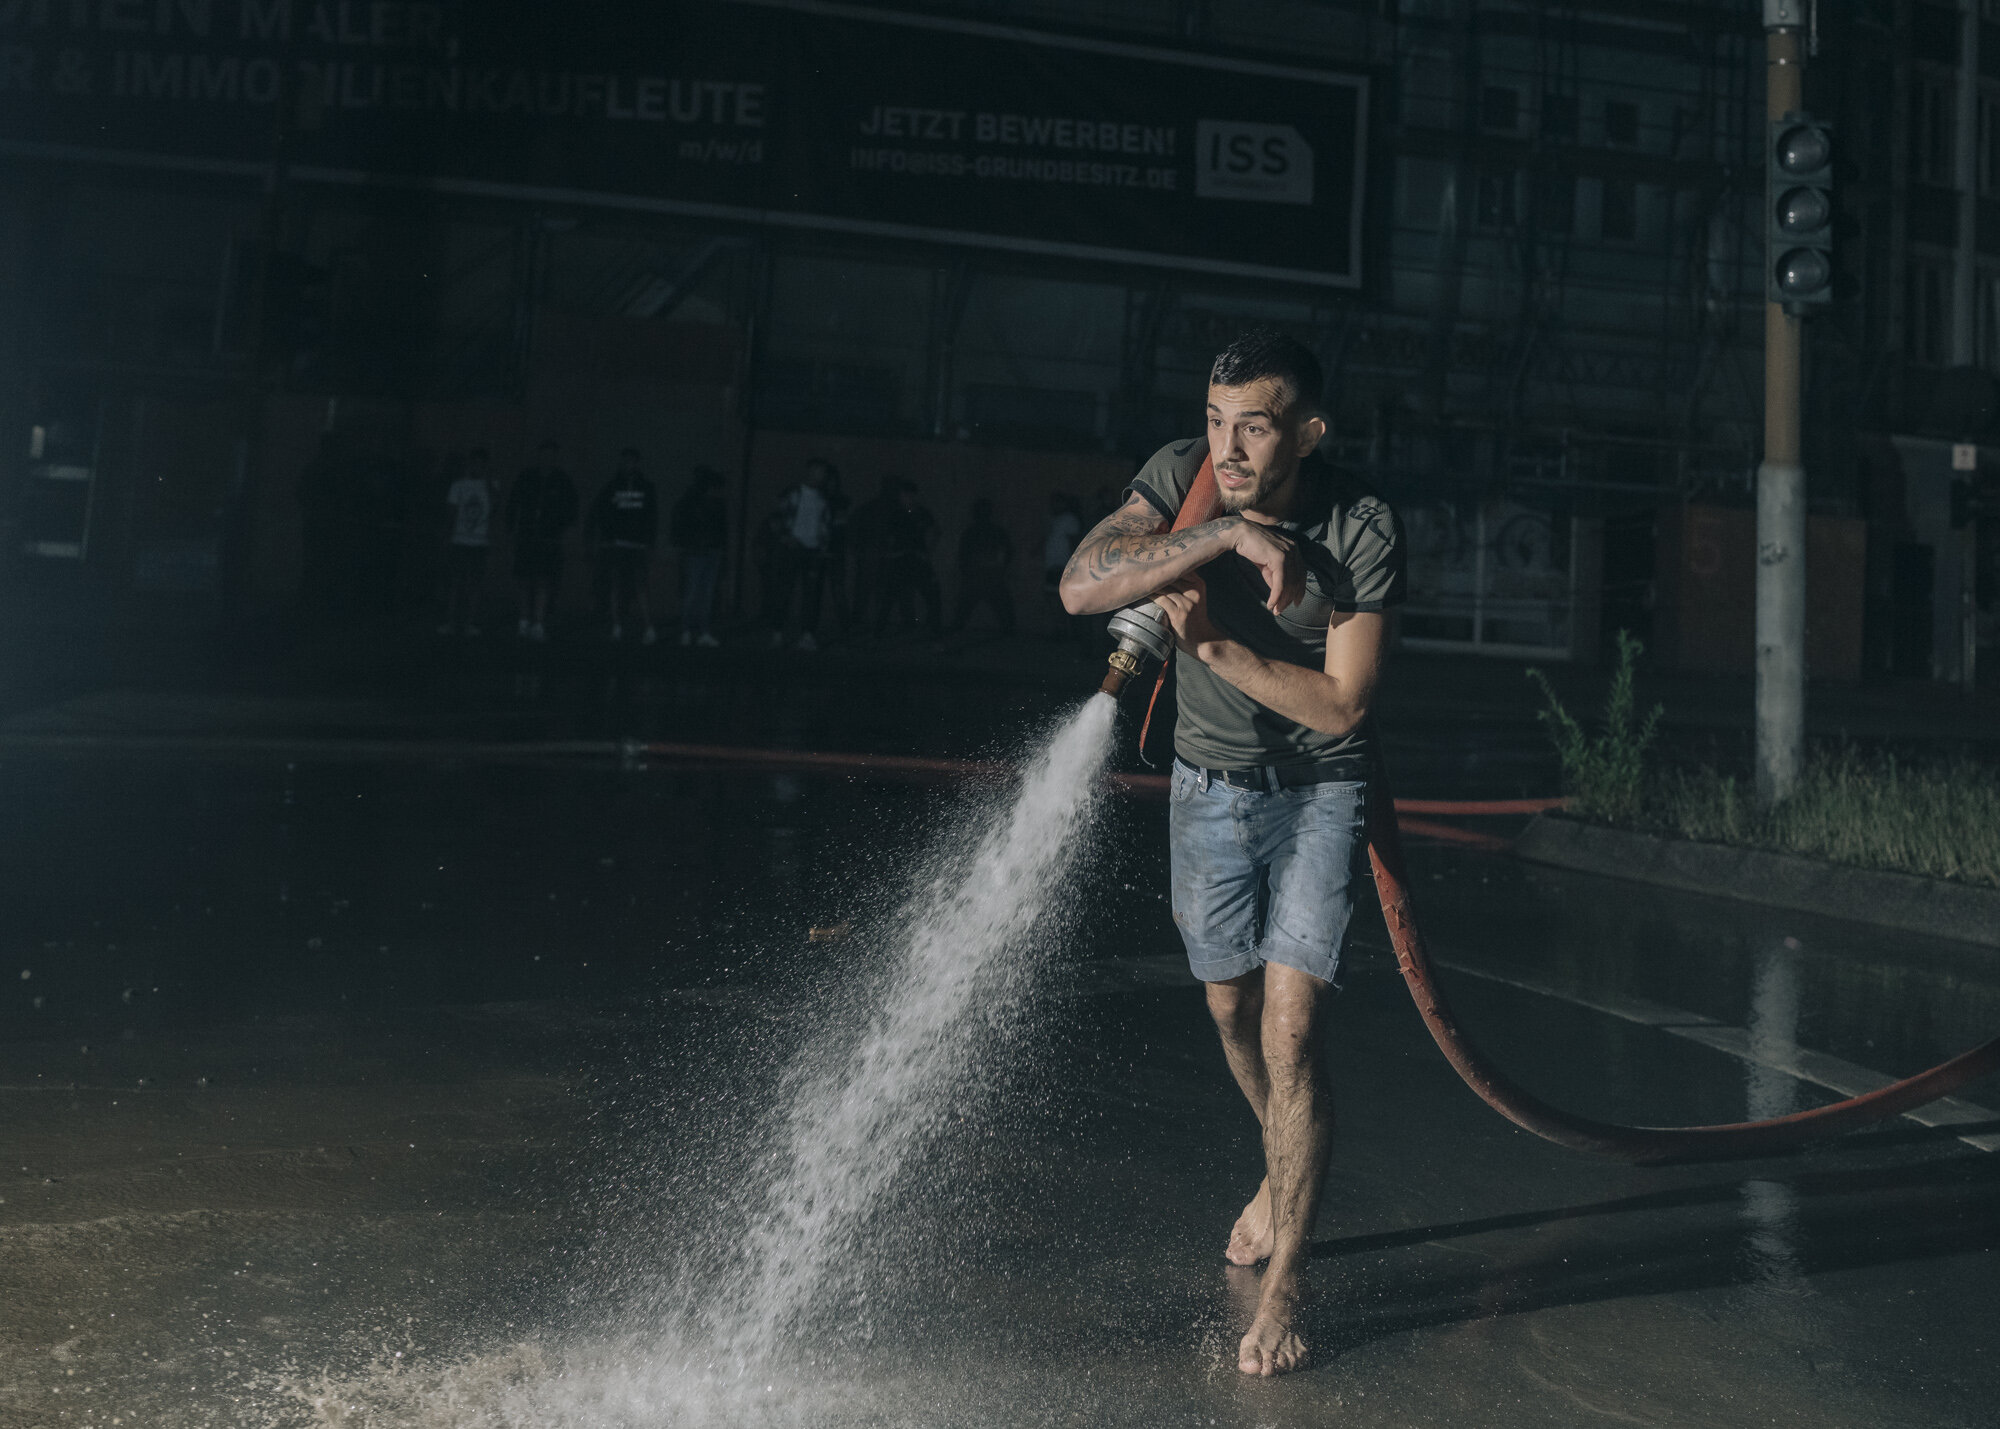  Flood in western Germany: In the city centre of Hagen, Radu Tudorel has been helping with the clean-up work since 11 o'clock in the morning. 